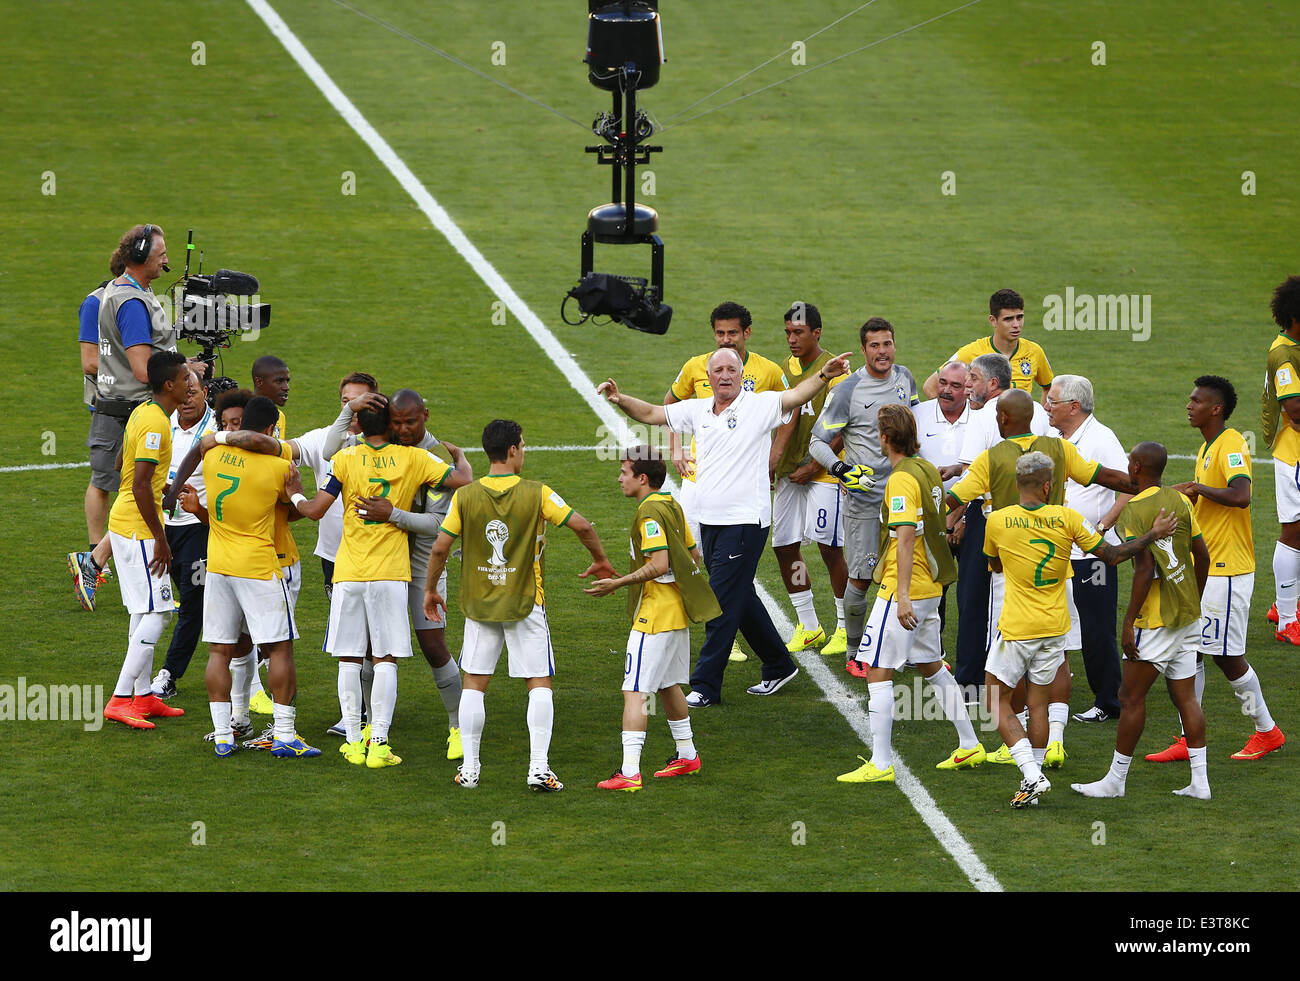 Belo Horizonte, Brazil. 28th June, 2014. Brazil's coach Luiz Felipe Scolari (C) and players celebrate the victory after a Round of 16 match between Brazil and Chile of 2014 FIFA World Cup at the Estadio Mineirao Stadium in Belo Horizonte, Brazil, on June 28, 2014. Brazil won 4-3 (3-2 in penalties) over Chile and qualified for Quarter-finals on Saturday. Credit:  Liu Bin/Xinhua/Alamy Live News Stock Photo